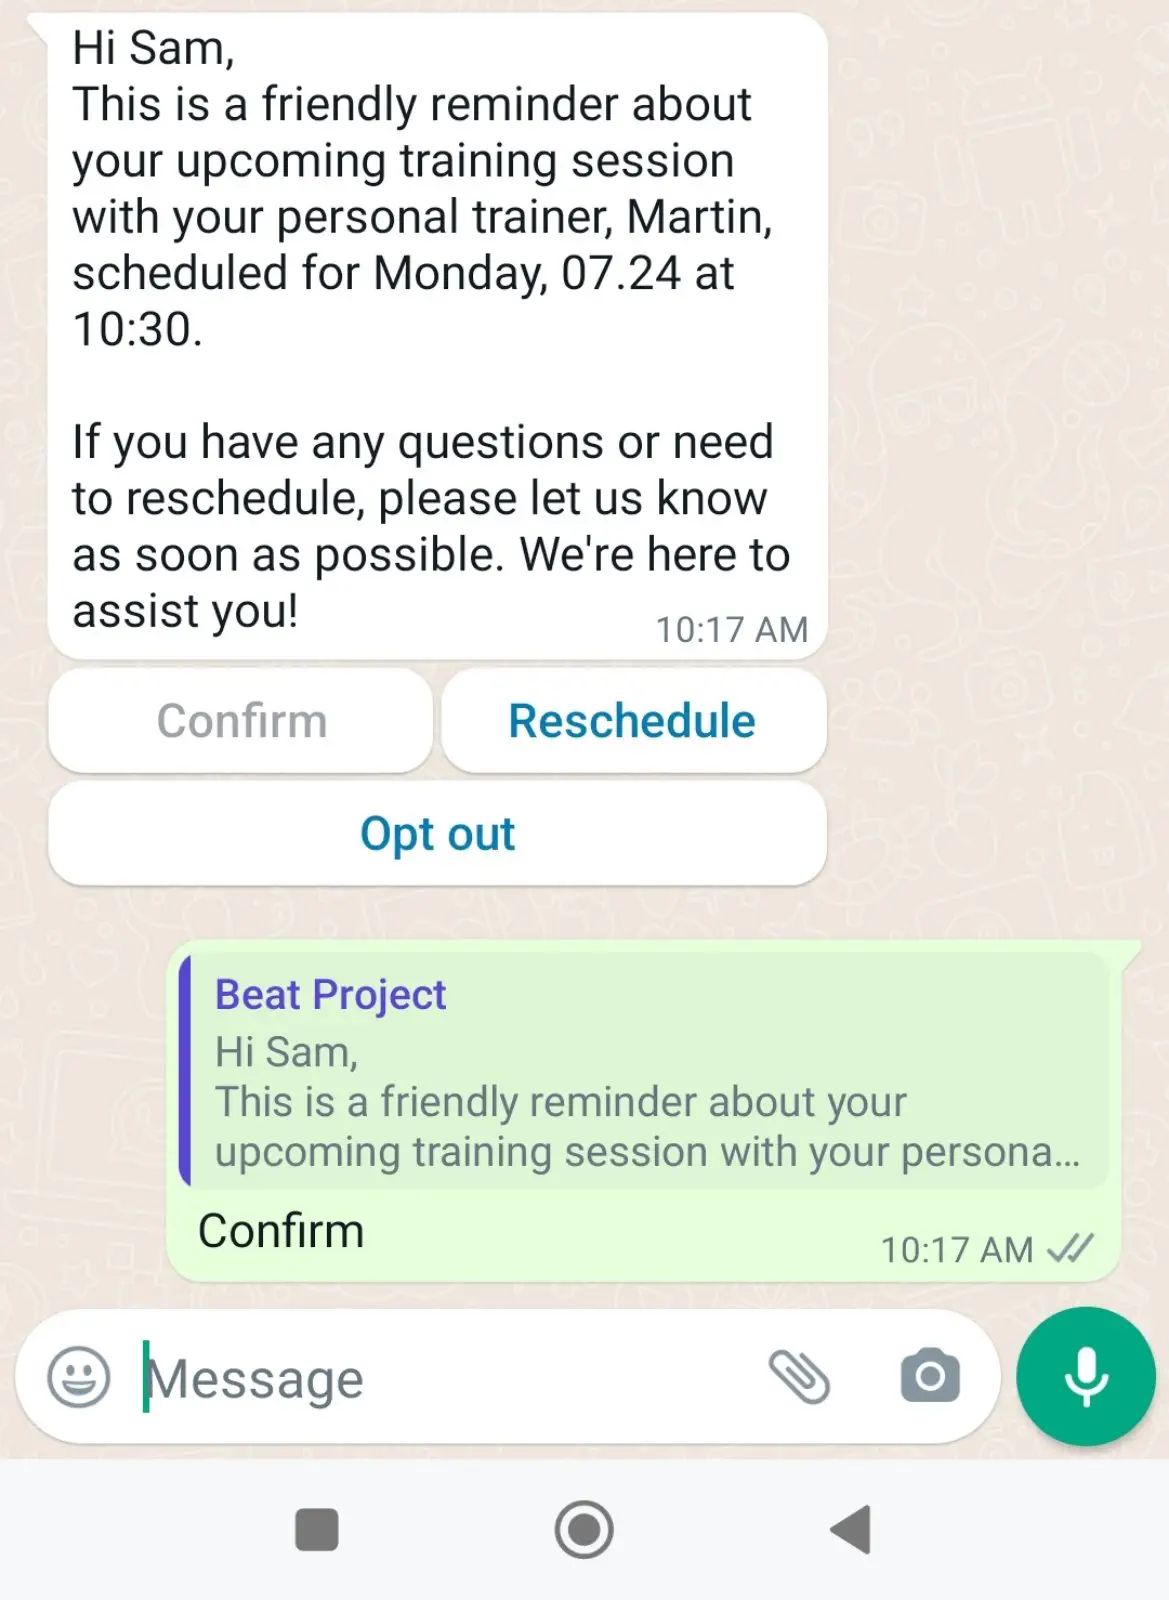 Whatsapp reminder for an upcomming training session